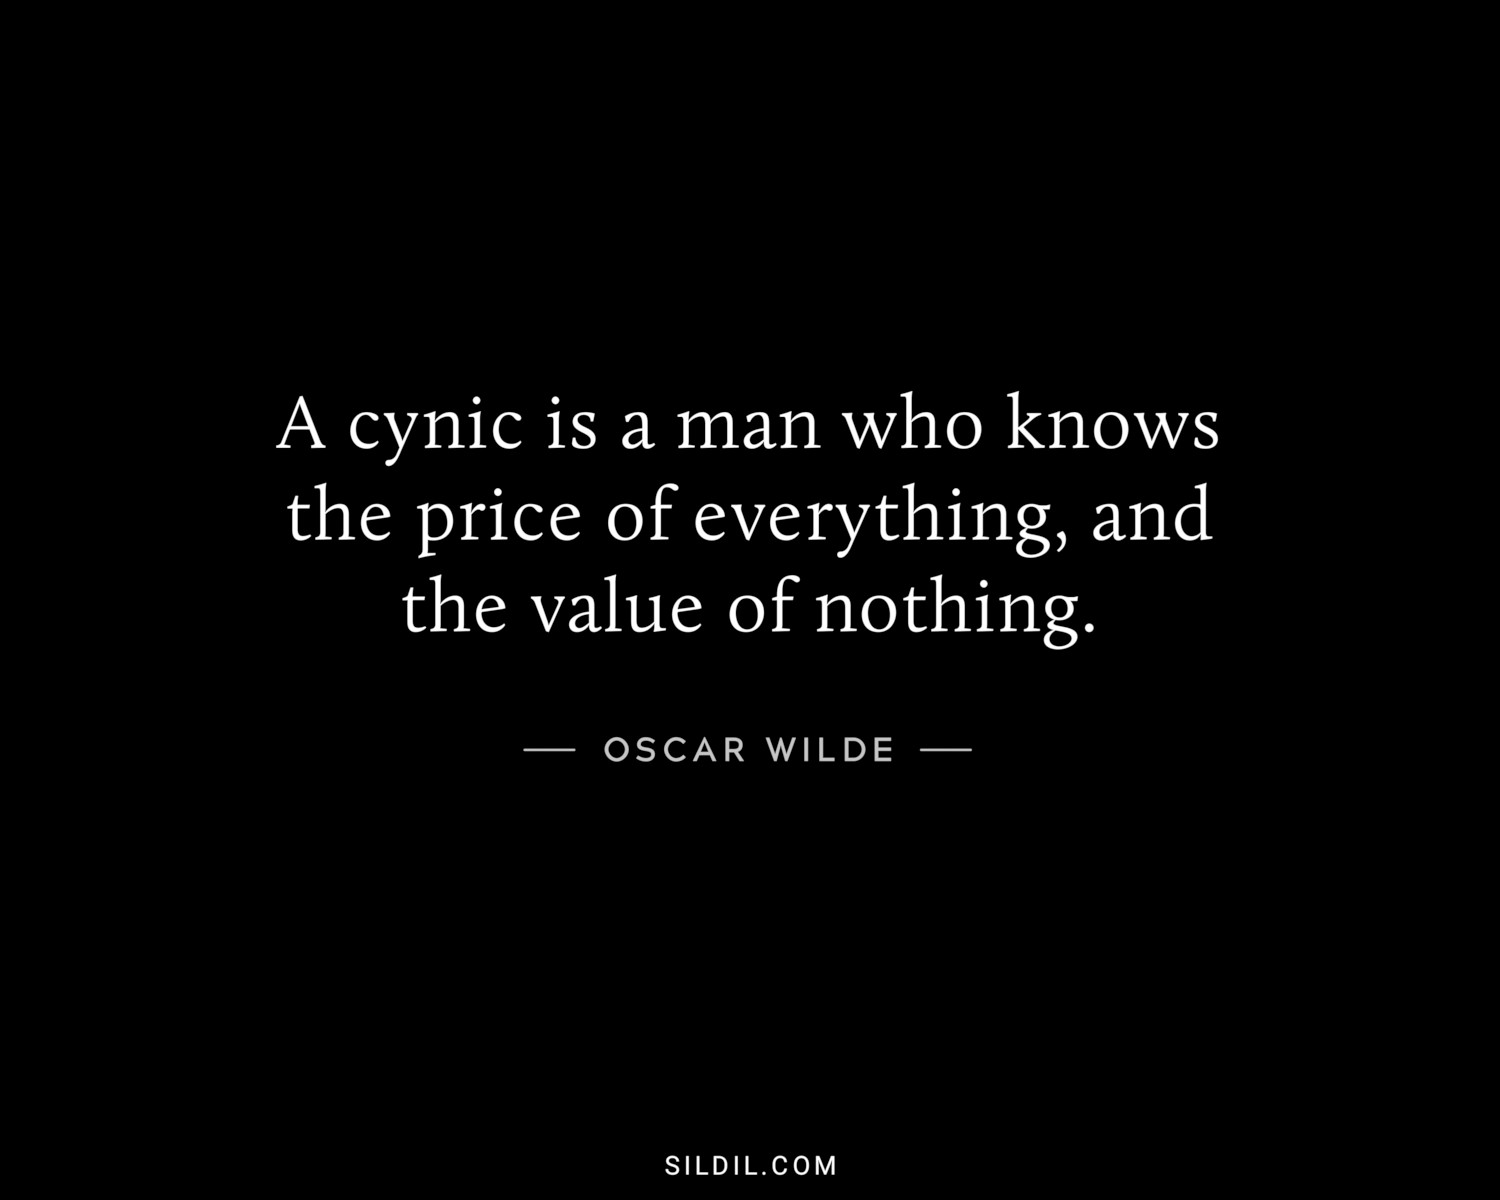 A cynic is a man who knows the price of everything, and the value of nothing.